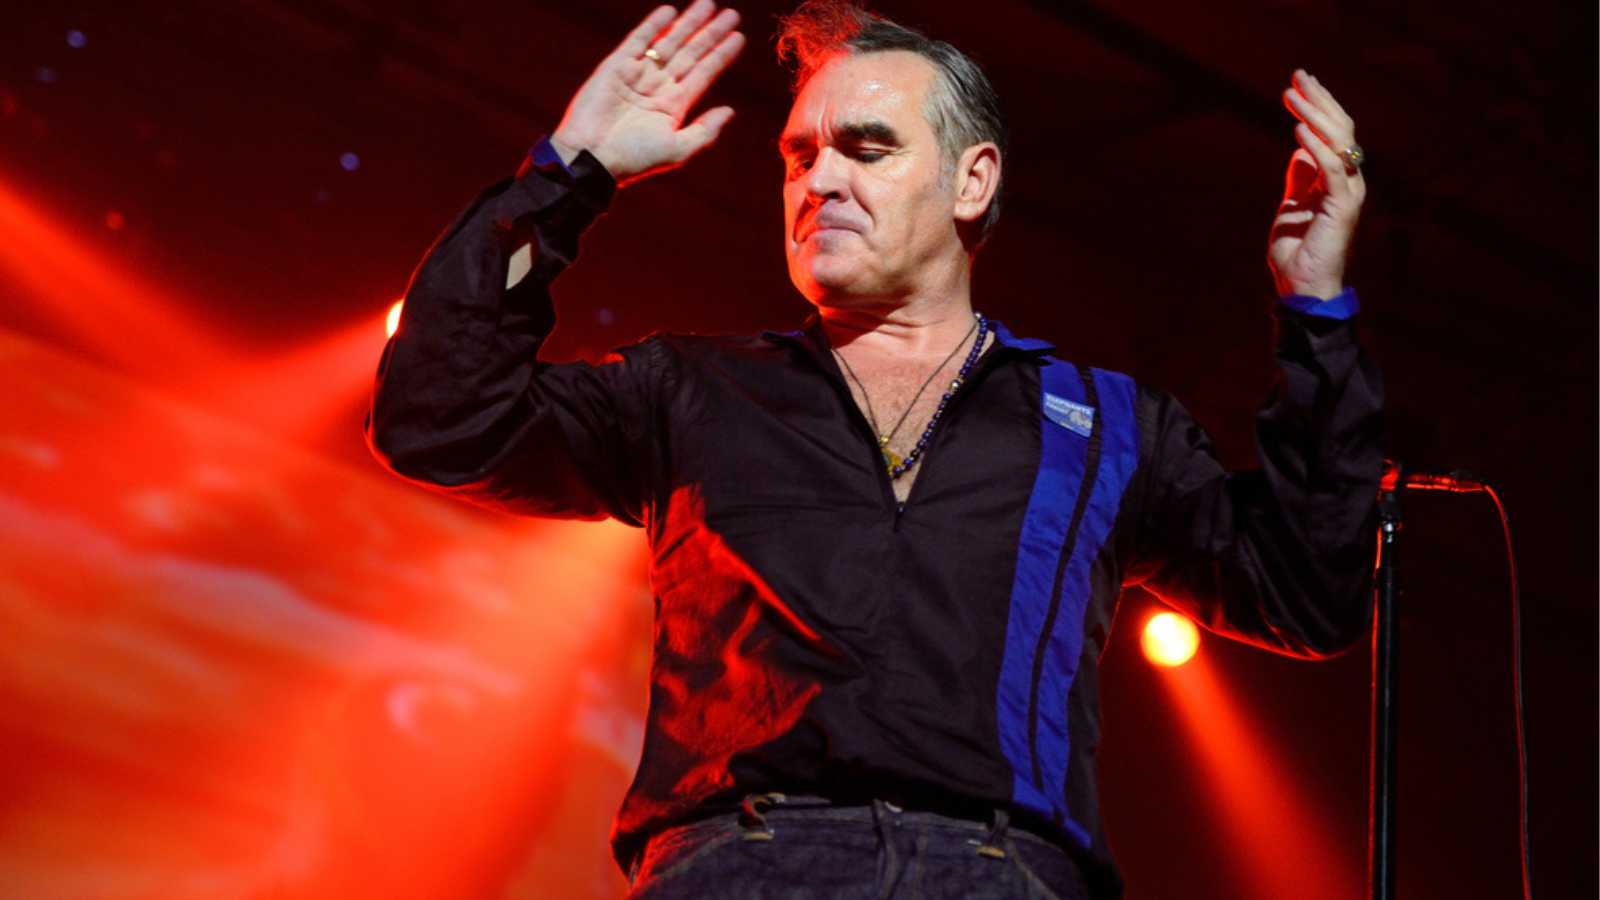 BARCELONA - OCT 10: Morrissey, the famous lyricist and vocalist of the rock band The Smiths, performs at Sant Jordi Club (venue) on October 10, 2014 in Barcelona, Spain.